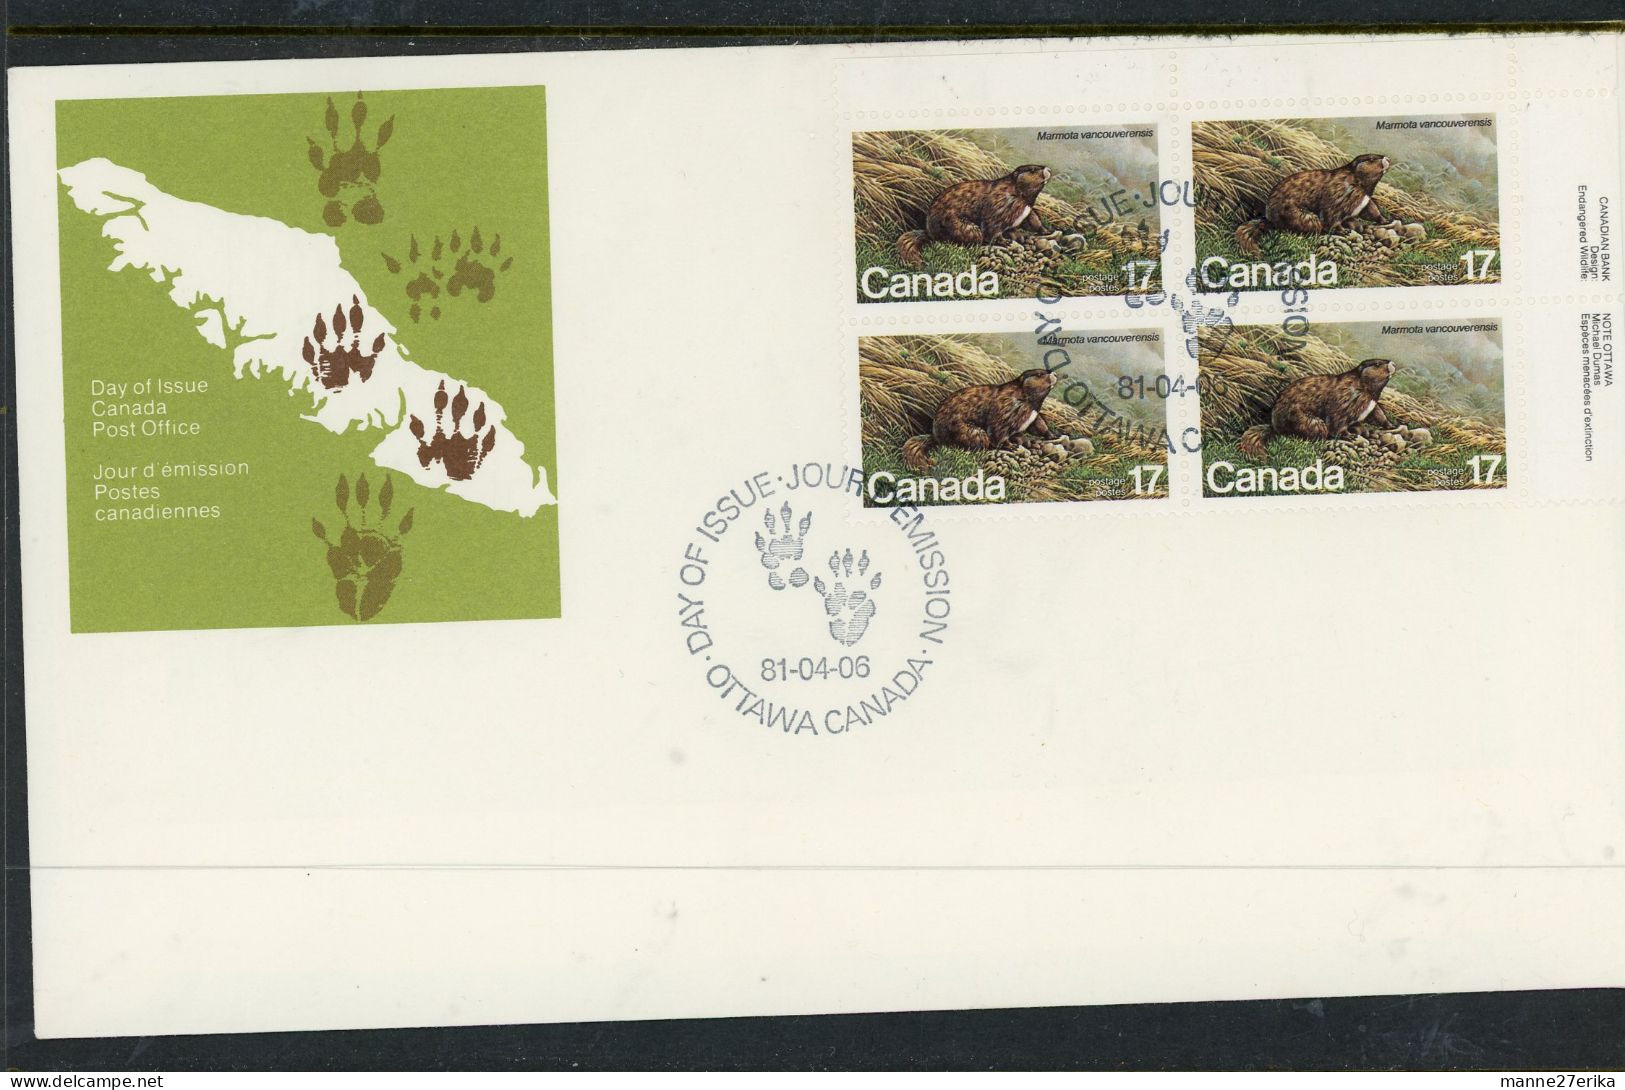 Canada FDC 1981 Vancouver Island Marmot - Covers & Documents